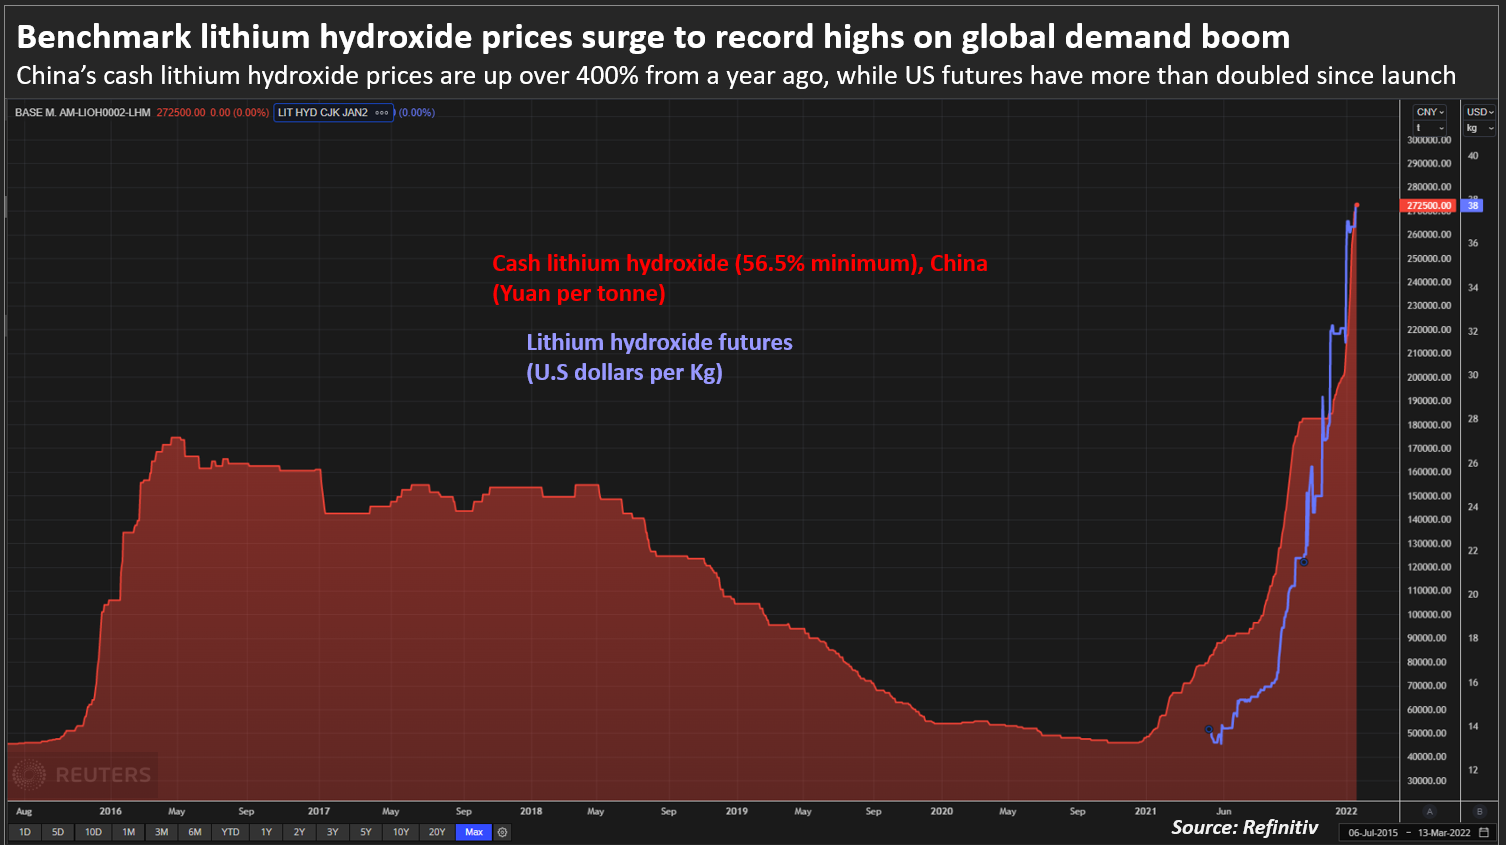 Benchmark lithium hydroxide prices surge to record highs on global demand boom